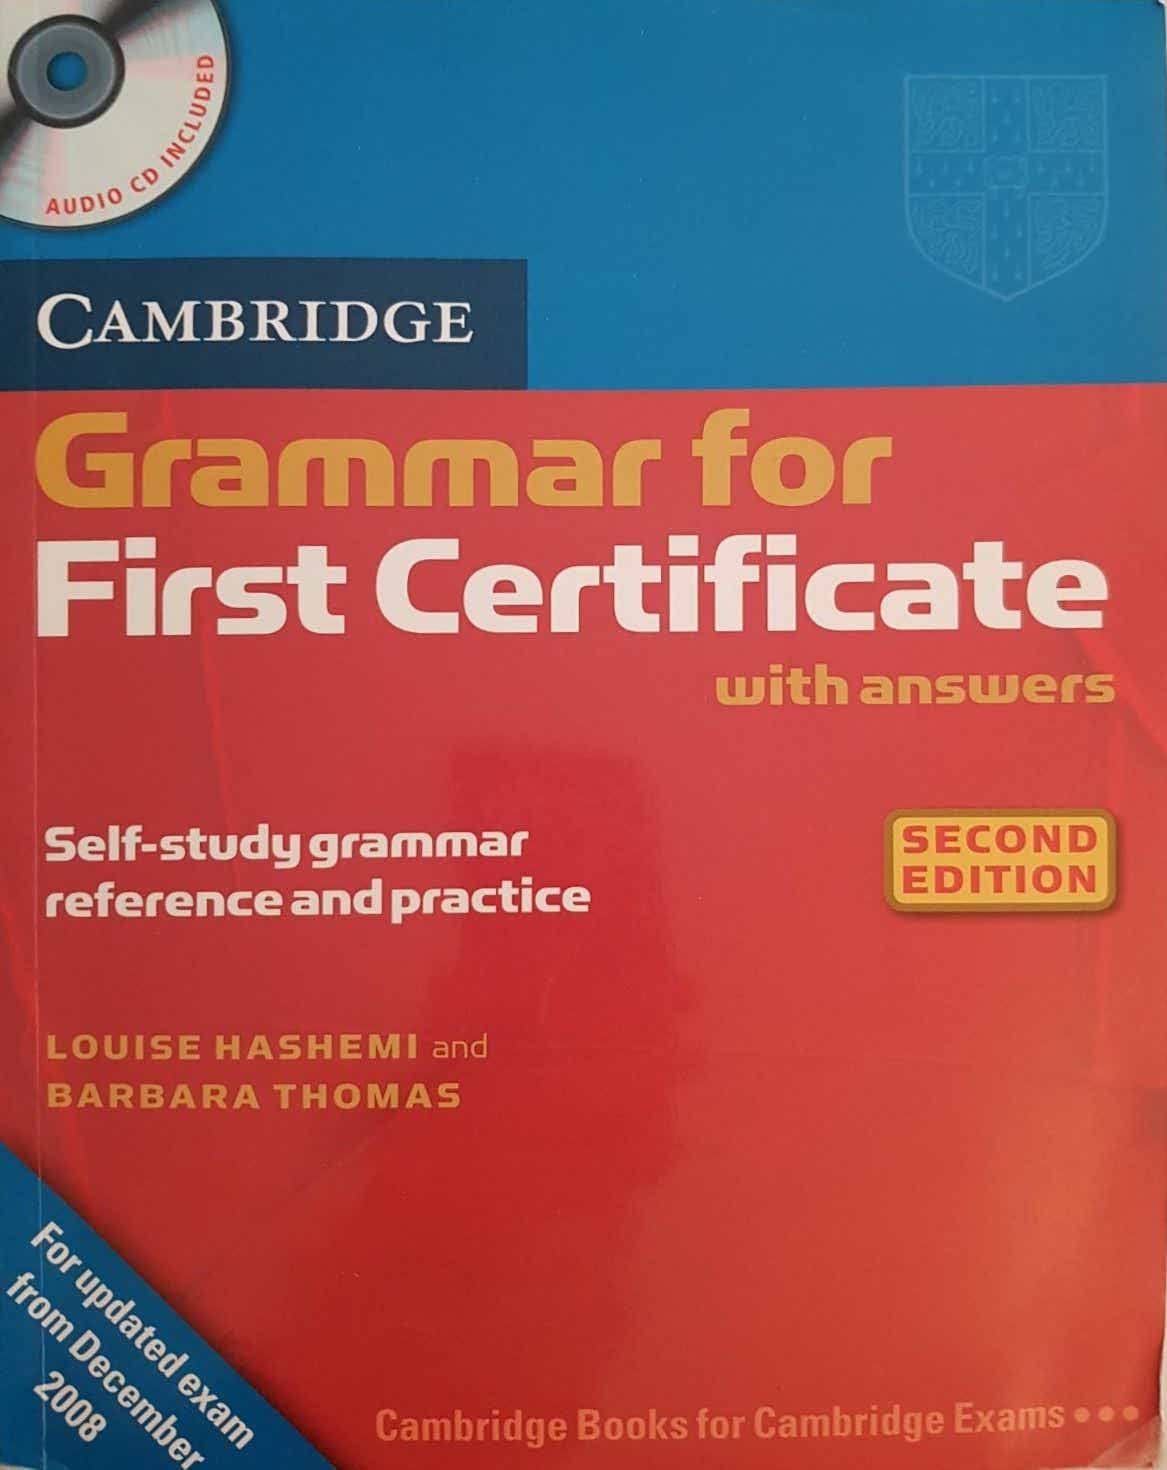 Grammar for First Certificate Like New Not Appicable  (4619394547767)